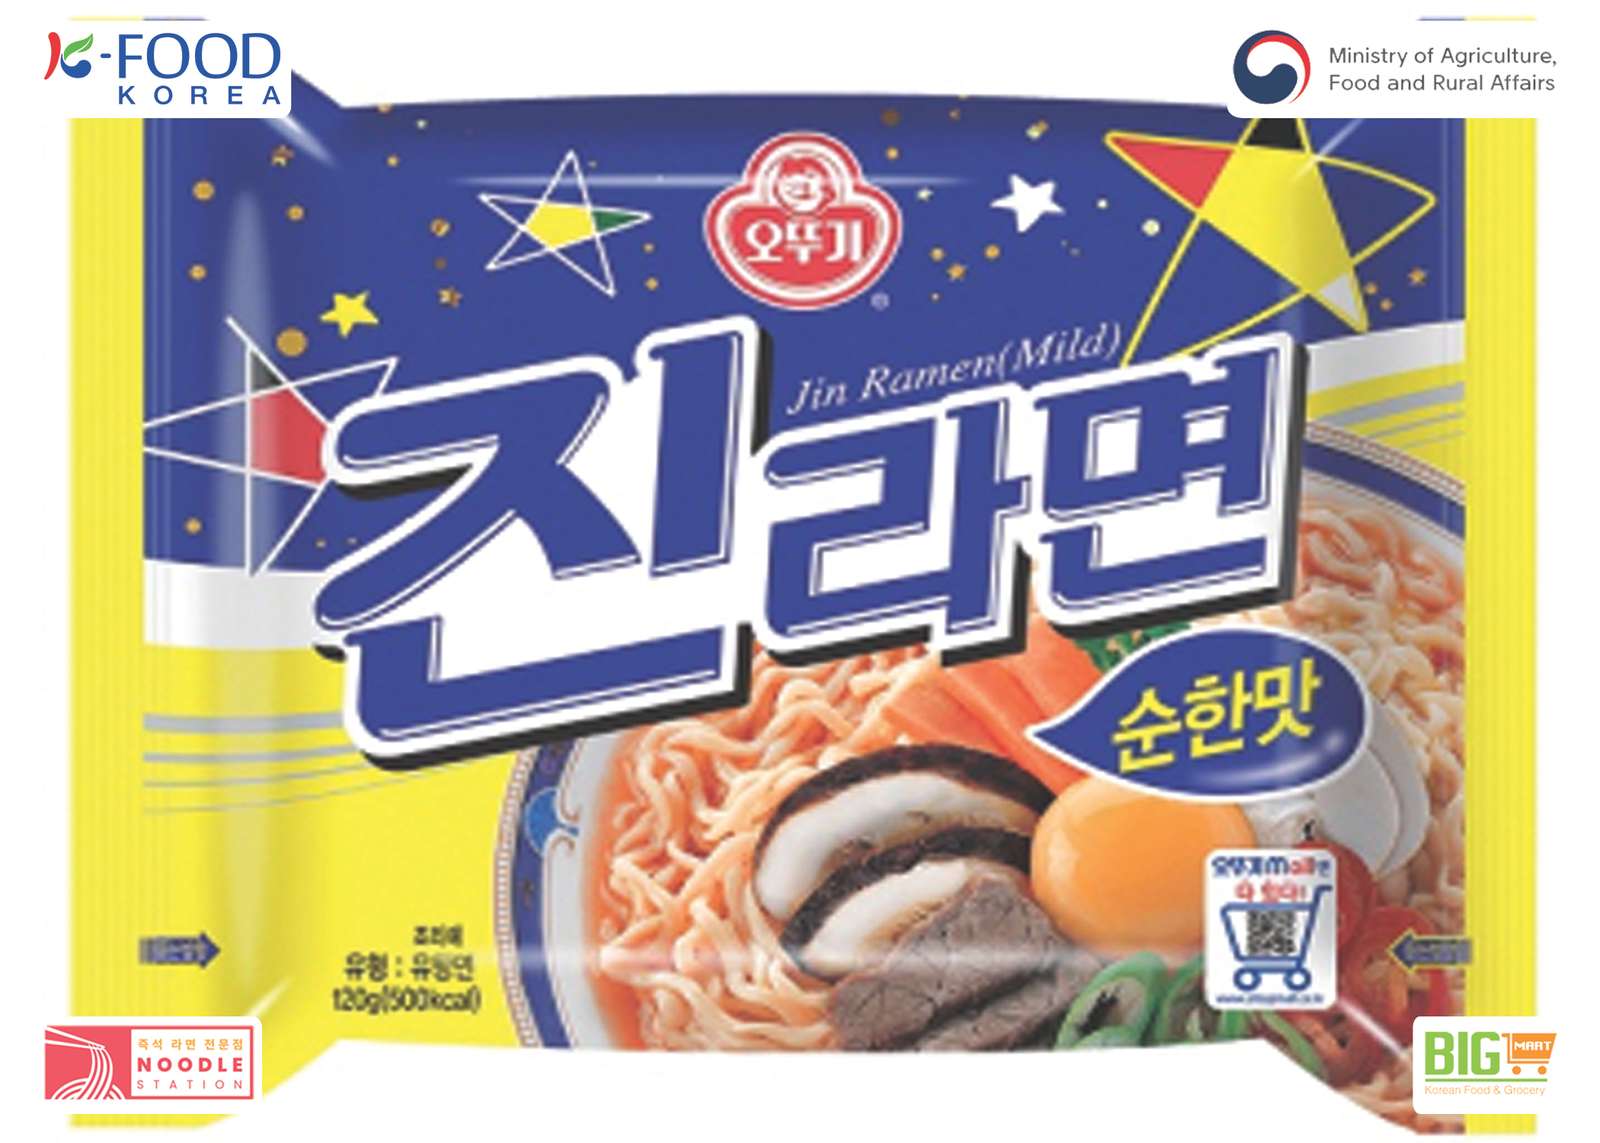 JIN RAMEN puzzle online from photo